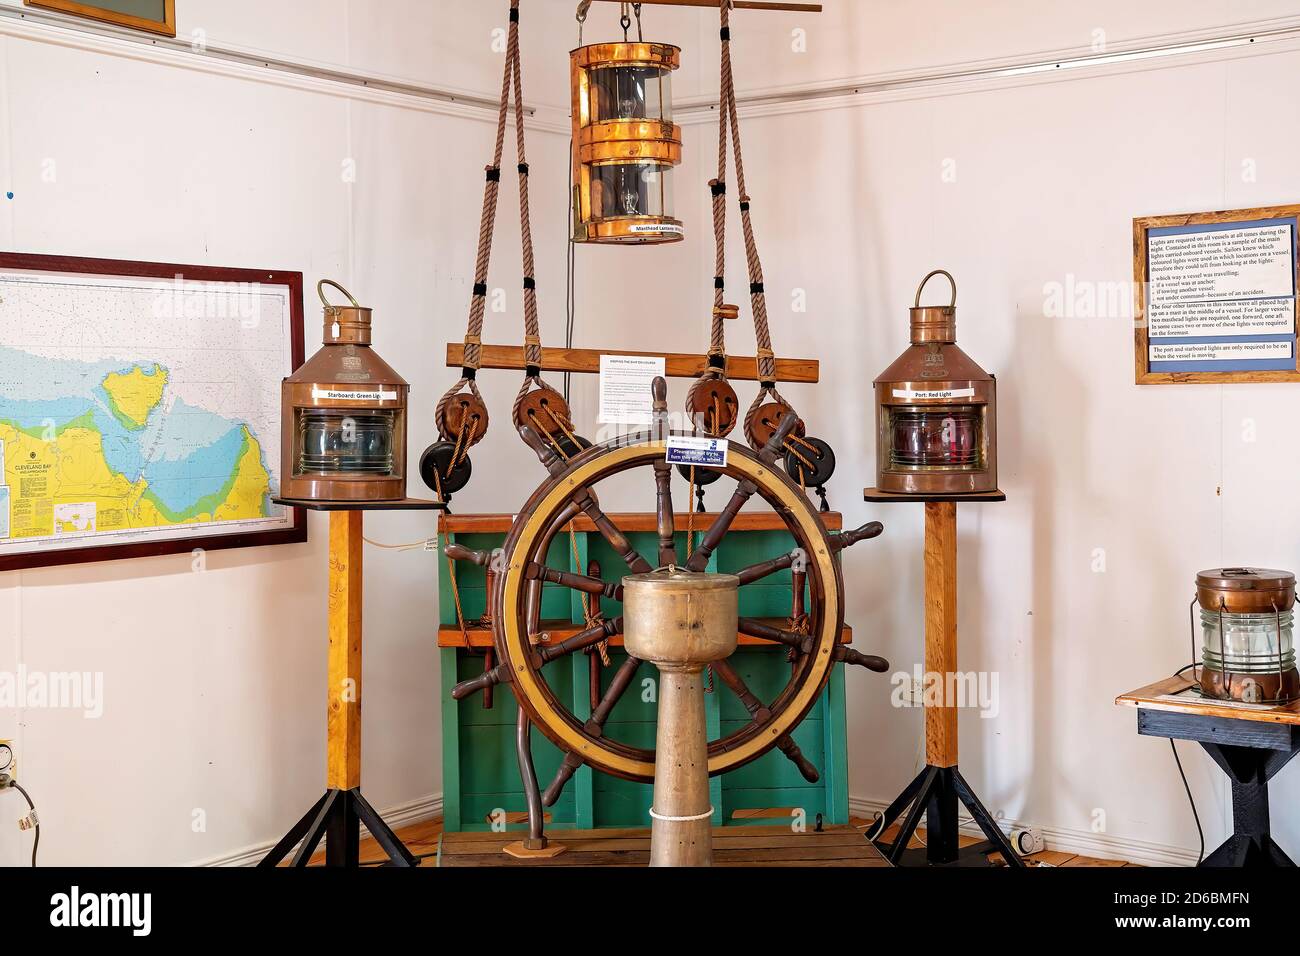 Townsville, Queensland, Australia - June 2020: Lighting objects and steering wheel used in navigation in a bygone era Stock Photo